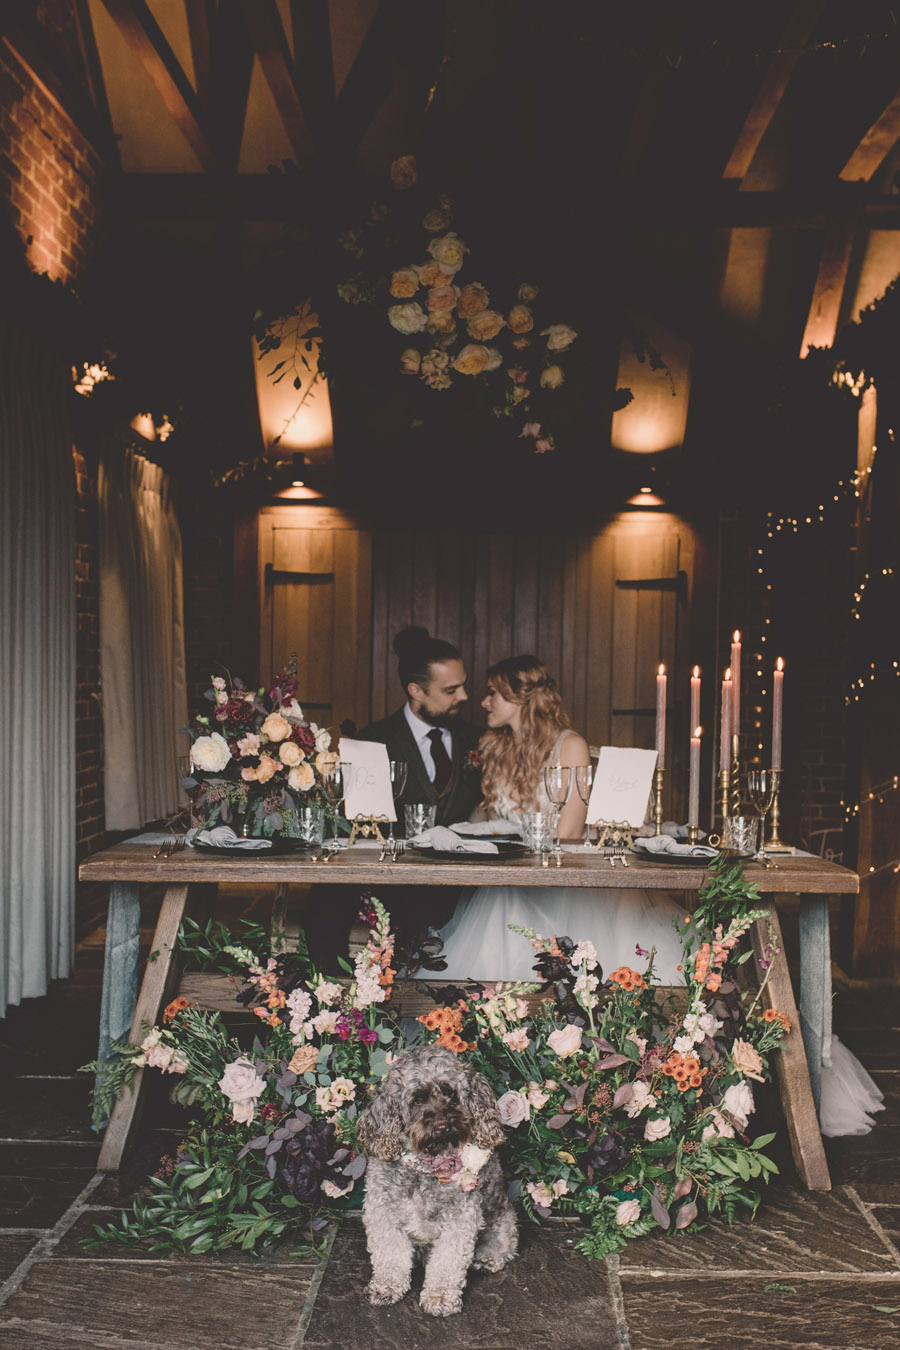 We Found Love! Natural, modern wedding inspiration from The Ferry House with images by Kerry Ann Duffy (2)